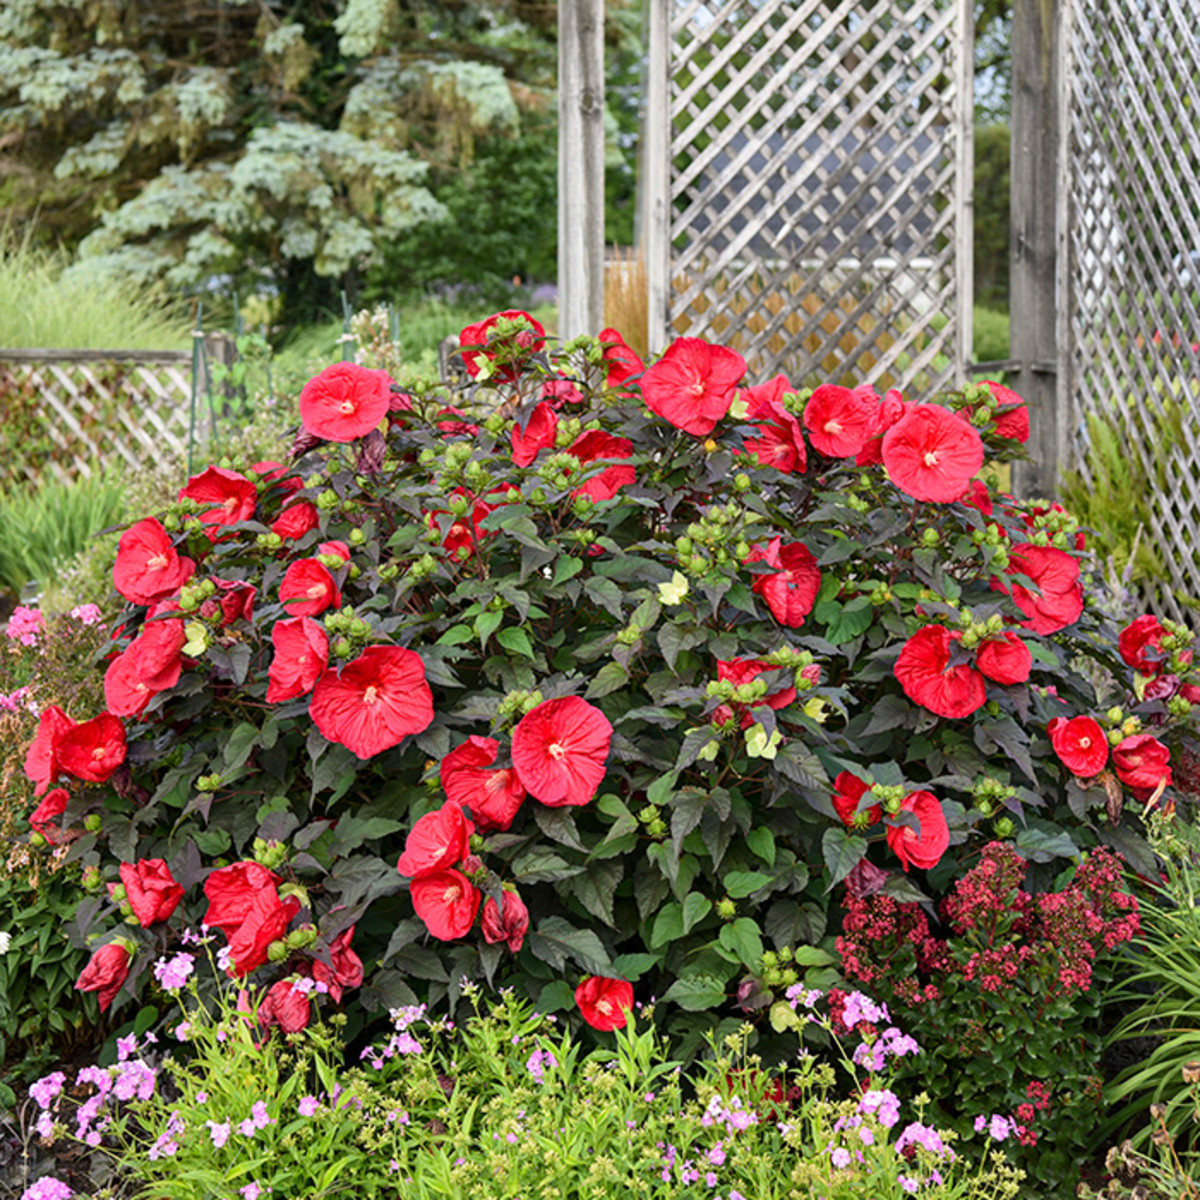 'Mars Madness' hardy hibiscus shares its large presence from late spring to autumn.